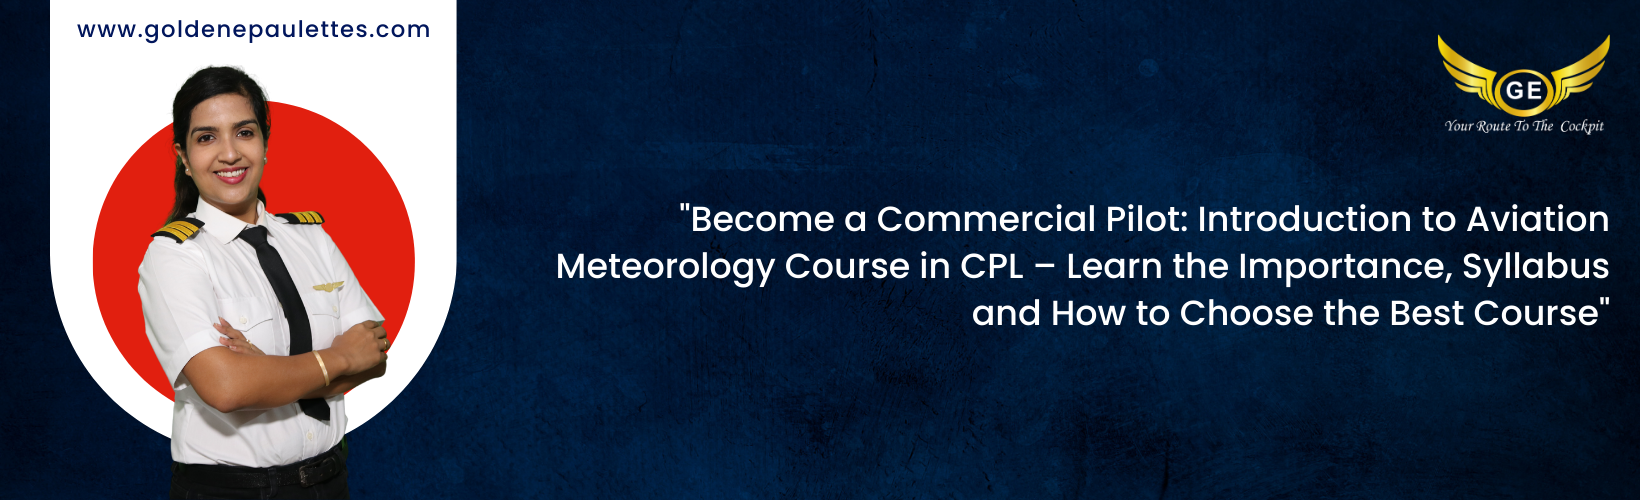 Introduction to Aviation Meteorology Course in Commercial Pilot License (CPL)